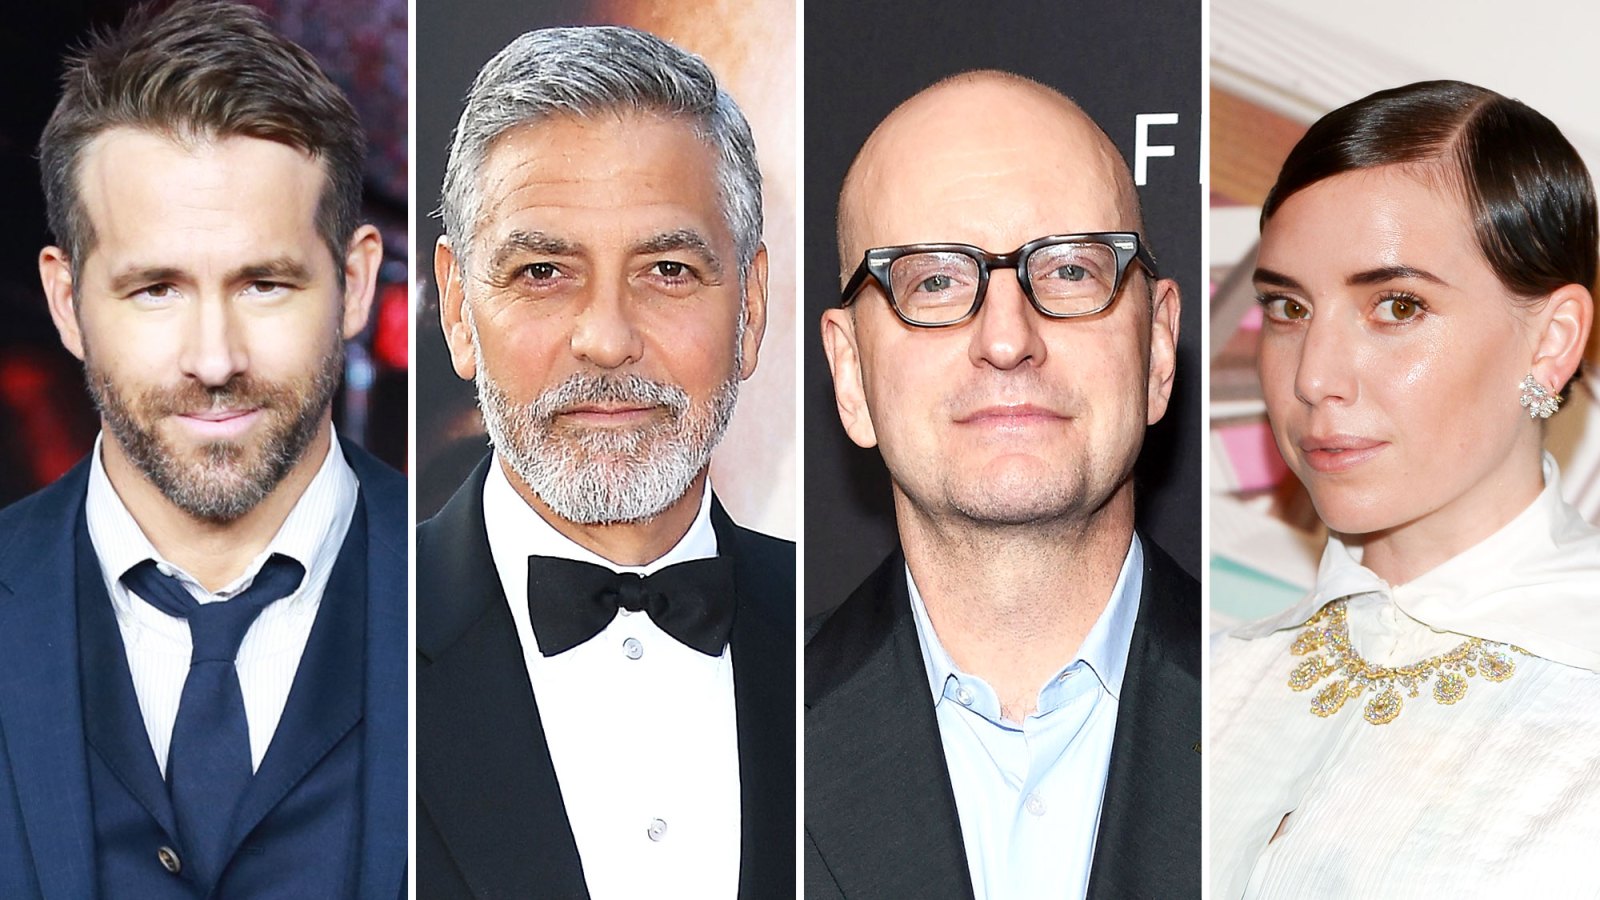 Ryan Reynolds, George Clooney, Steven Soderbergh and Lykke Li This 'Flight of Famous Faces' at MiniBar Hollywood Lets Customers Blindly Match a Celeb to Their Liquor